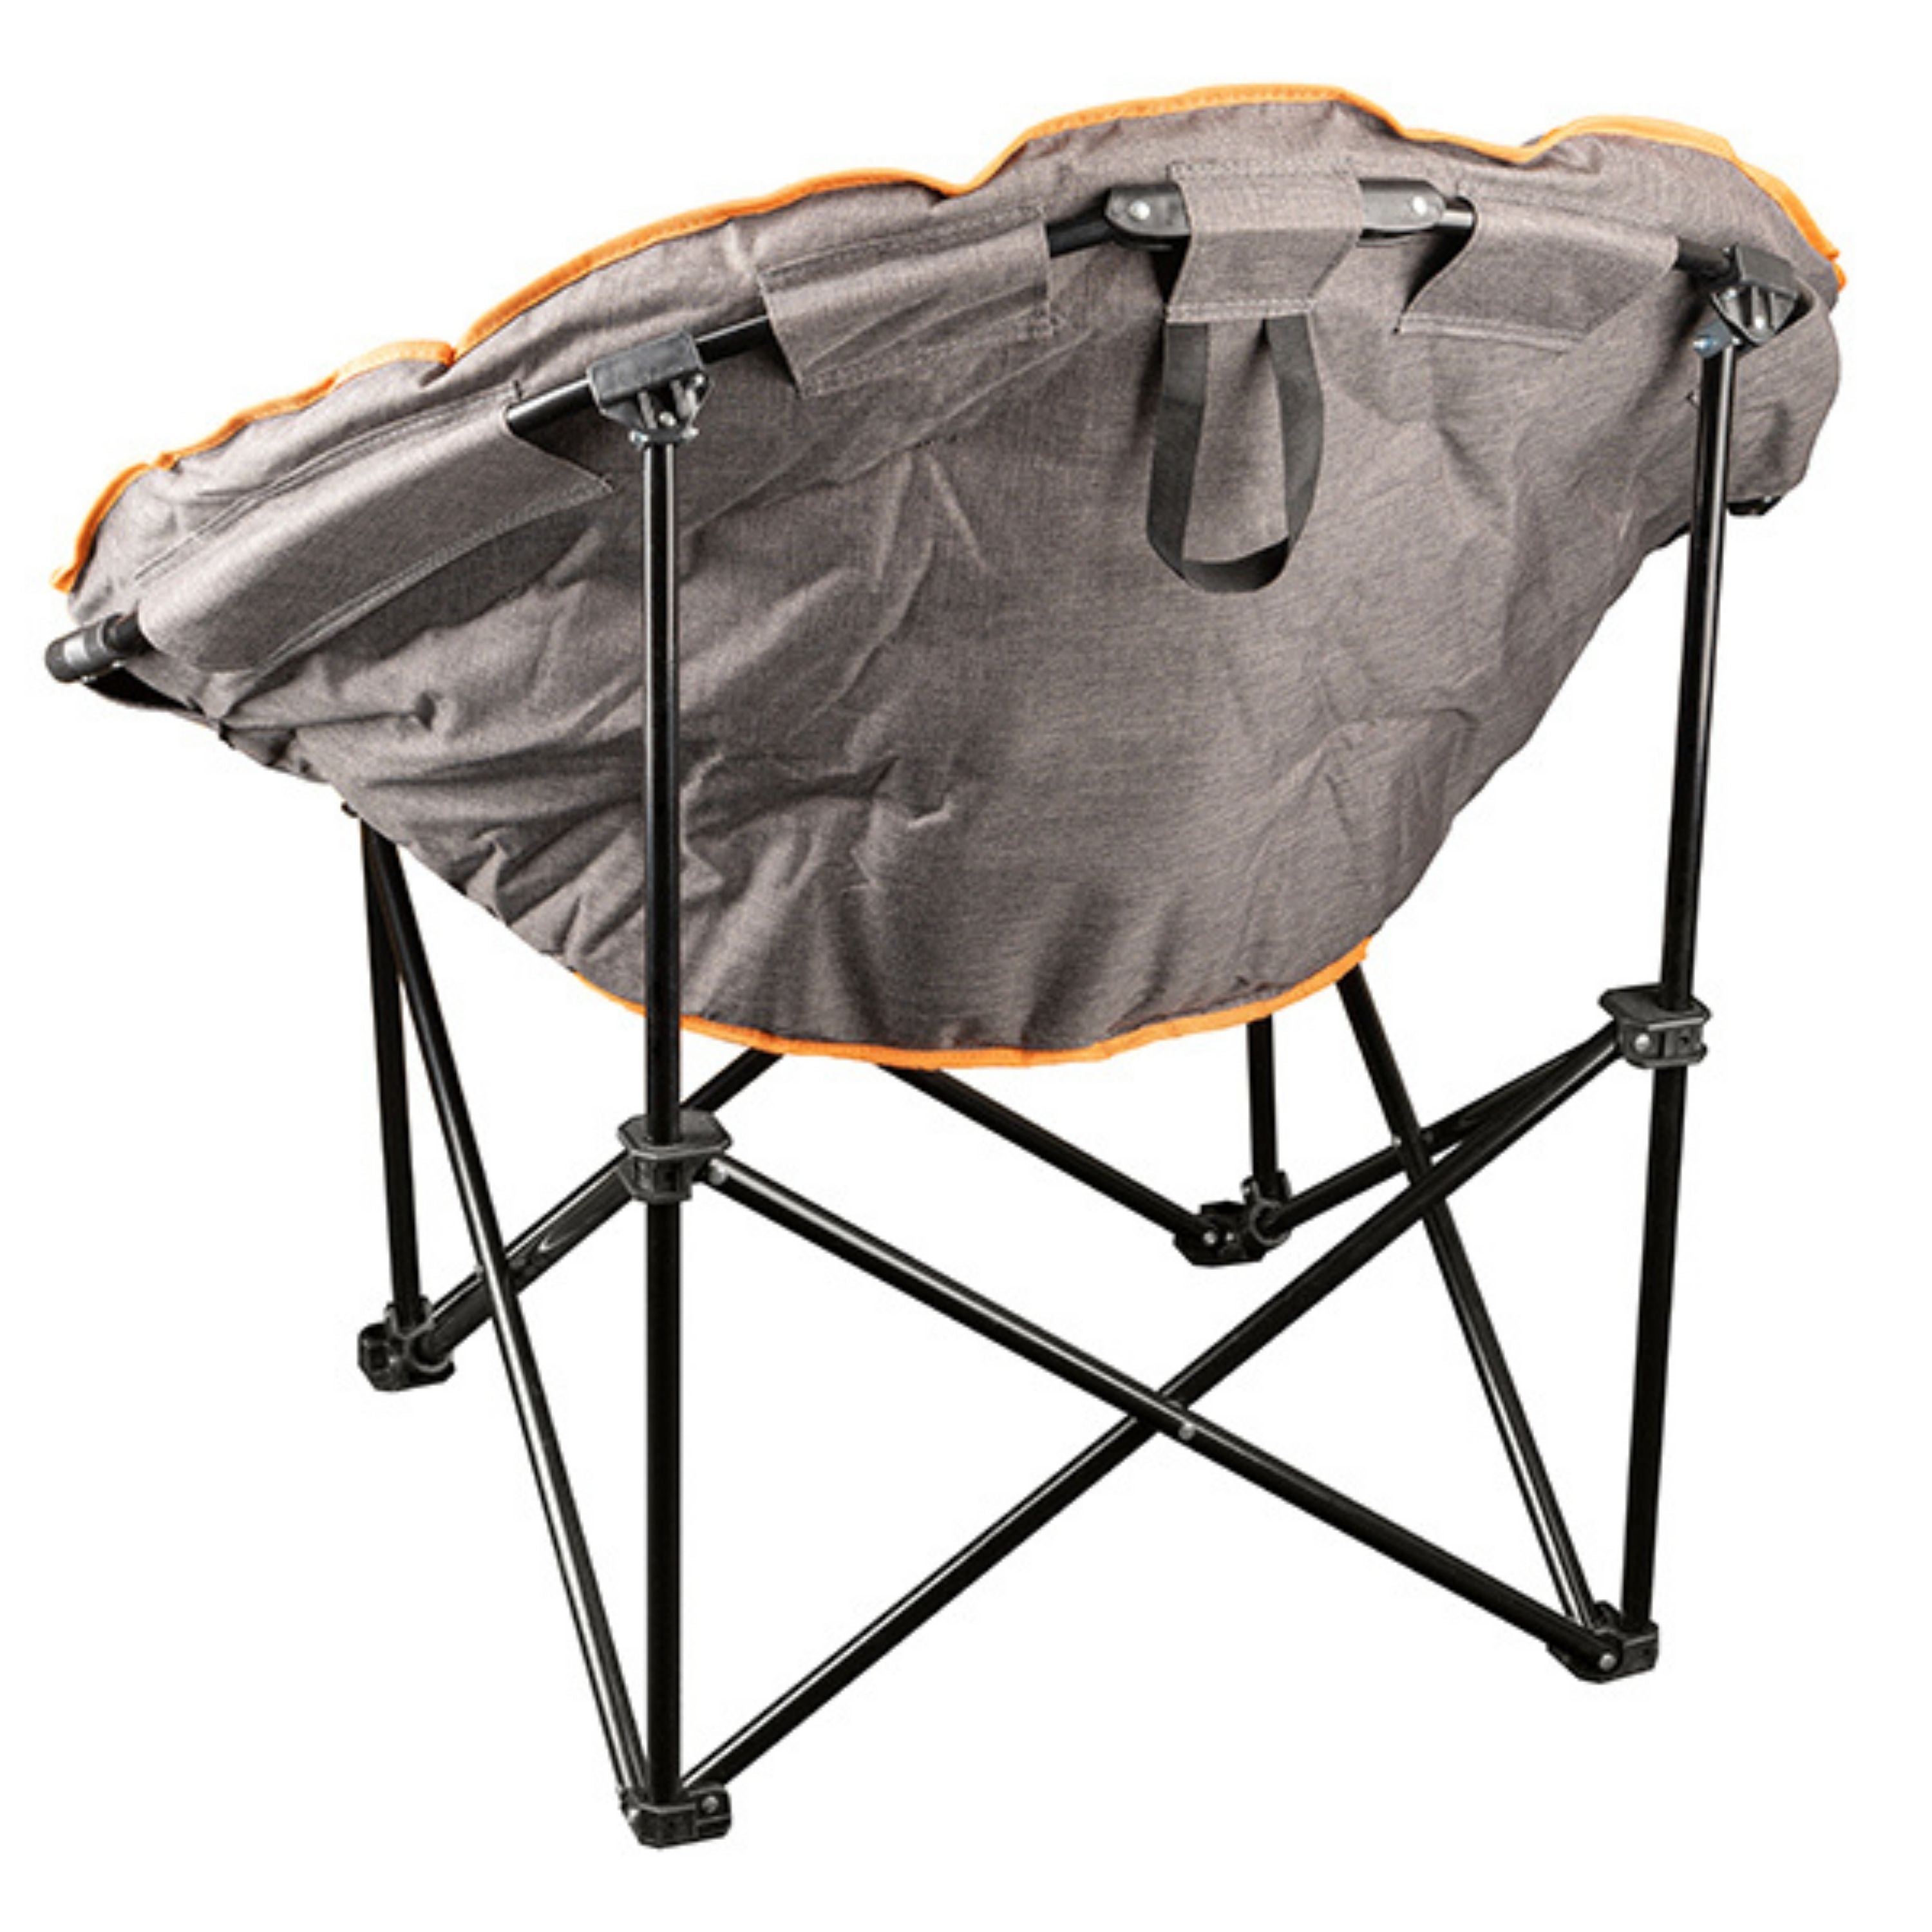 "Deluxe" Camping chair